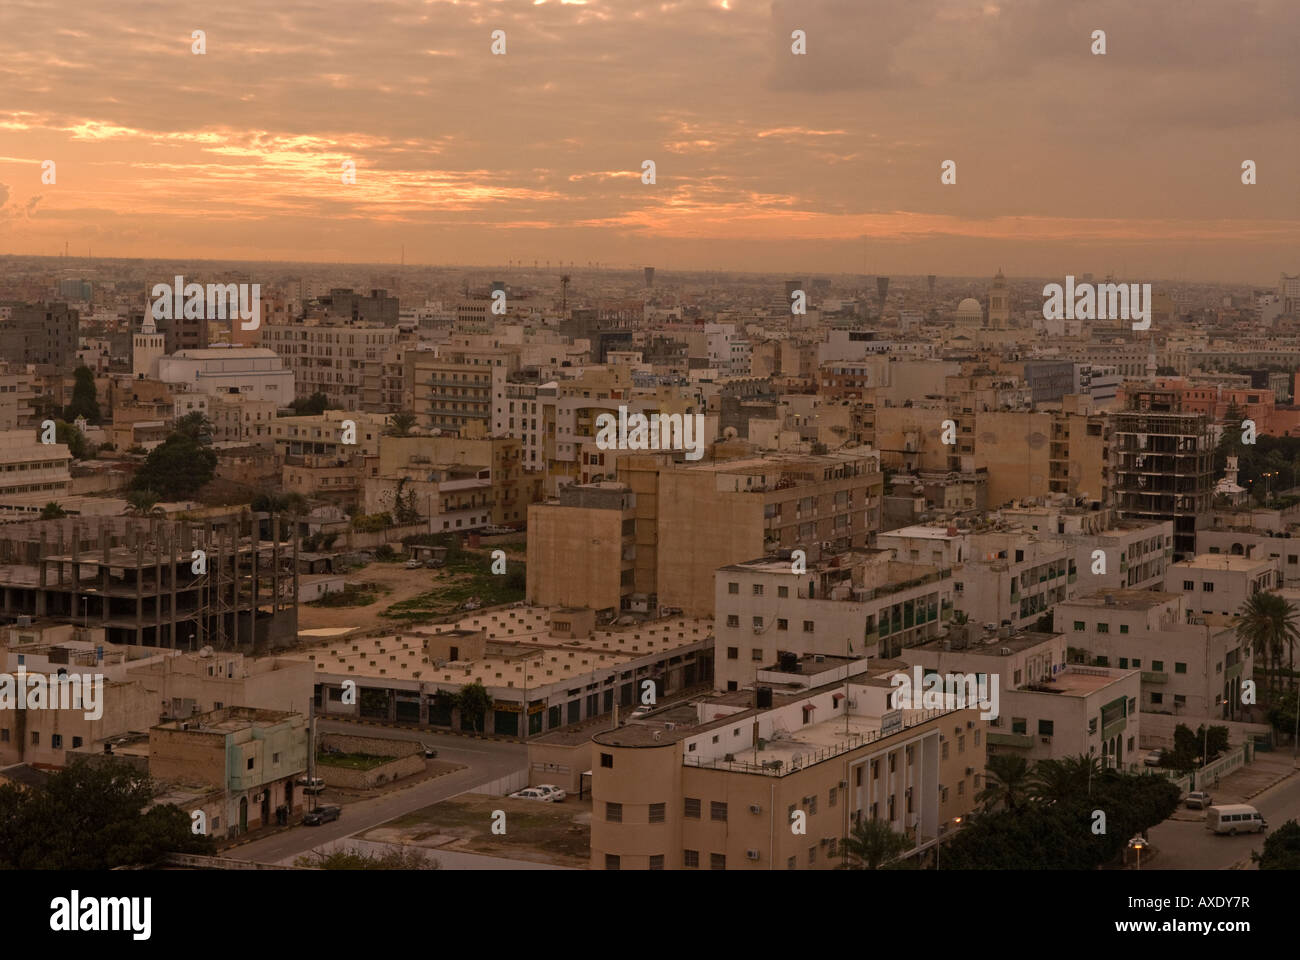 General view over the rooftops of the city of Tripoli, the capital of Libya, north Africa. Stock Photo